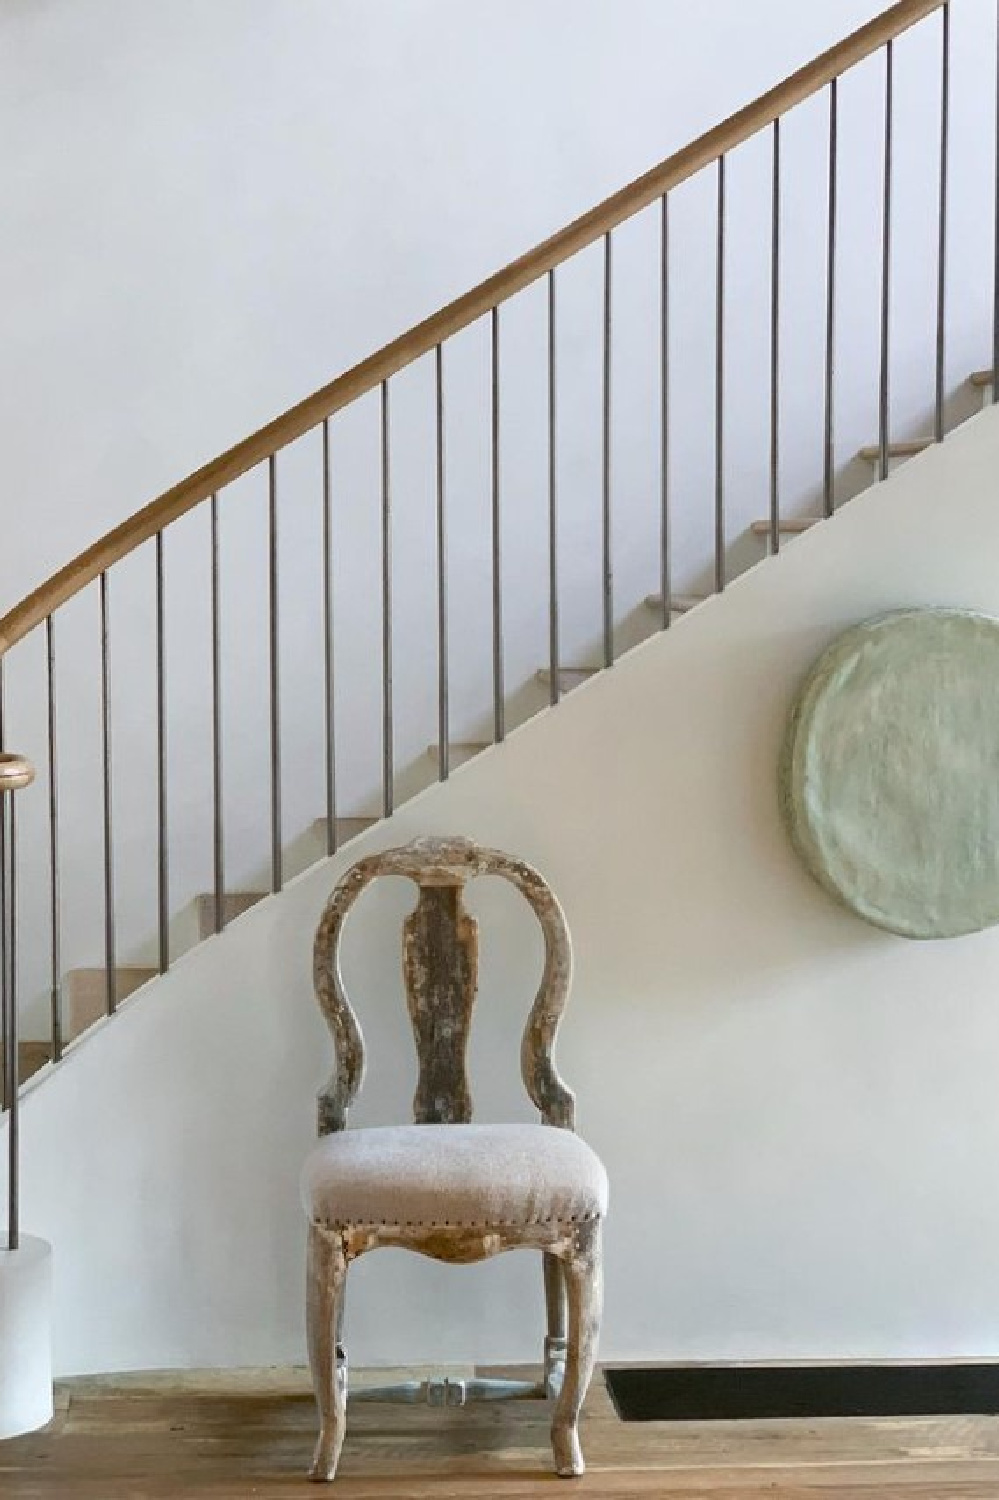 Graceful staircase. Timeless interior design by Shannon Bowers with nods to European antiques, patina, understated elegance, and sophisticated simplicity. #shannonbowers #timelessinteriors